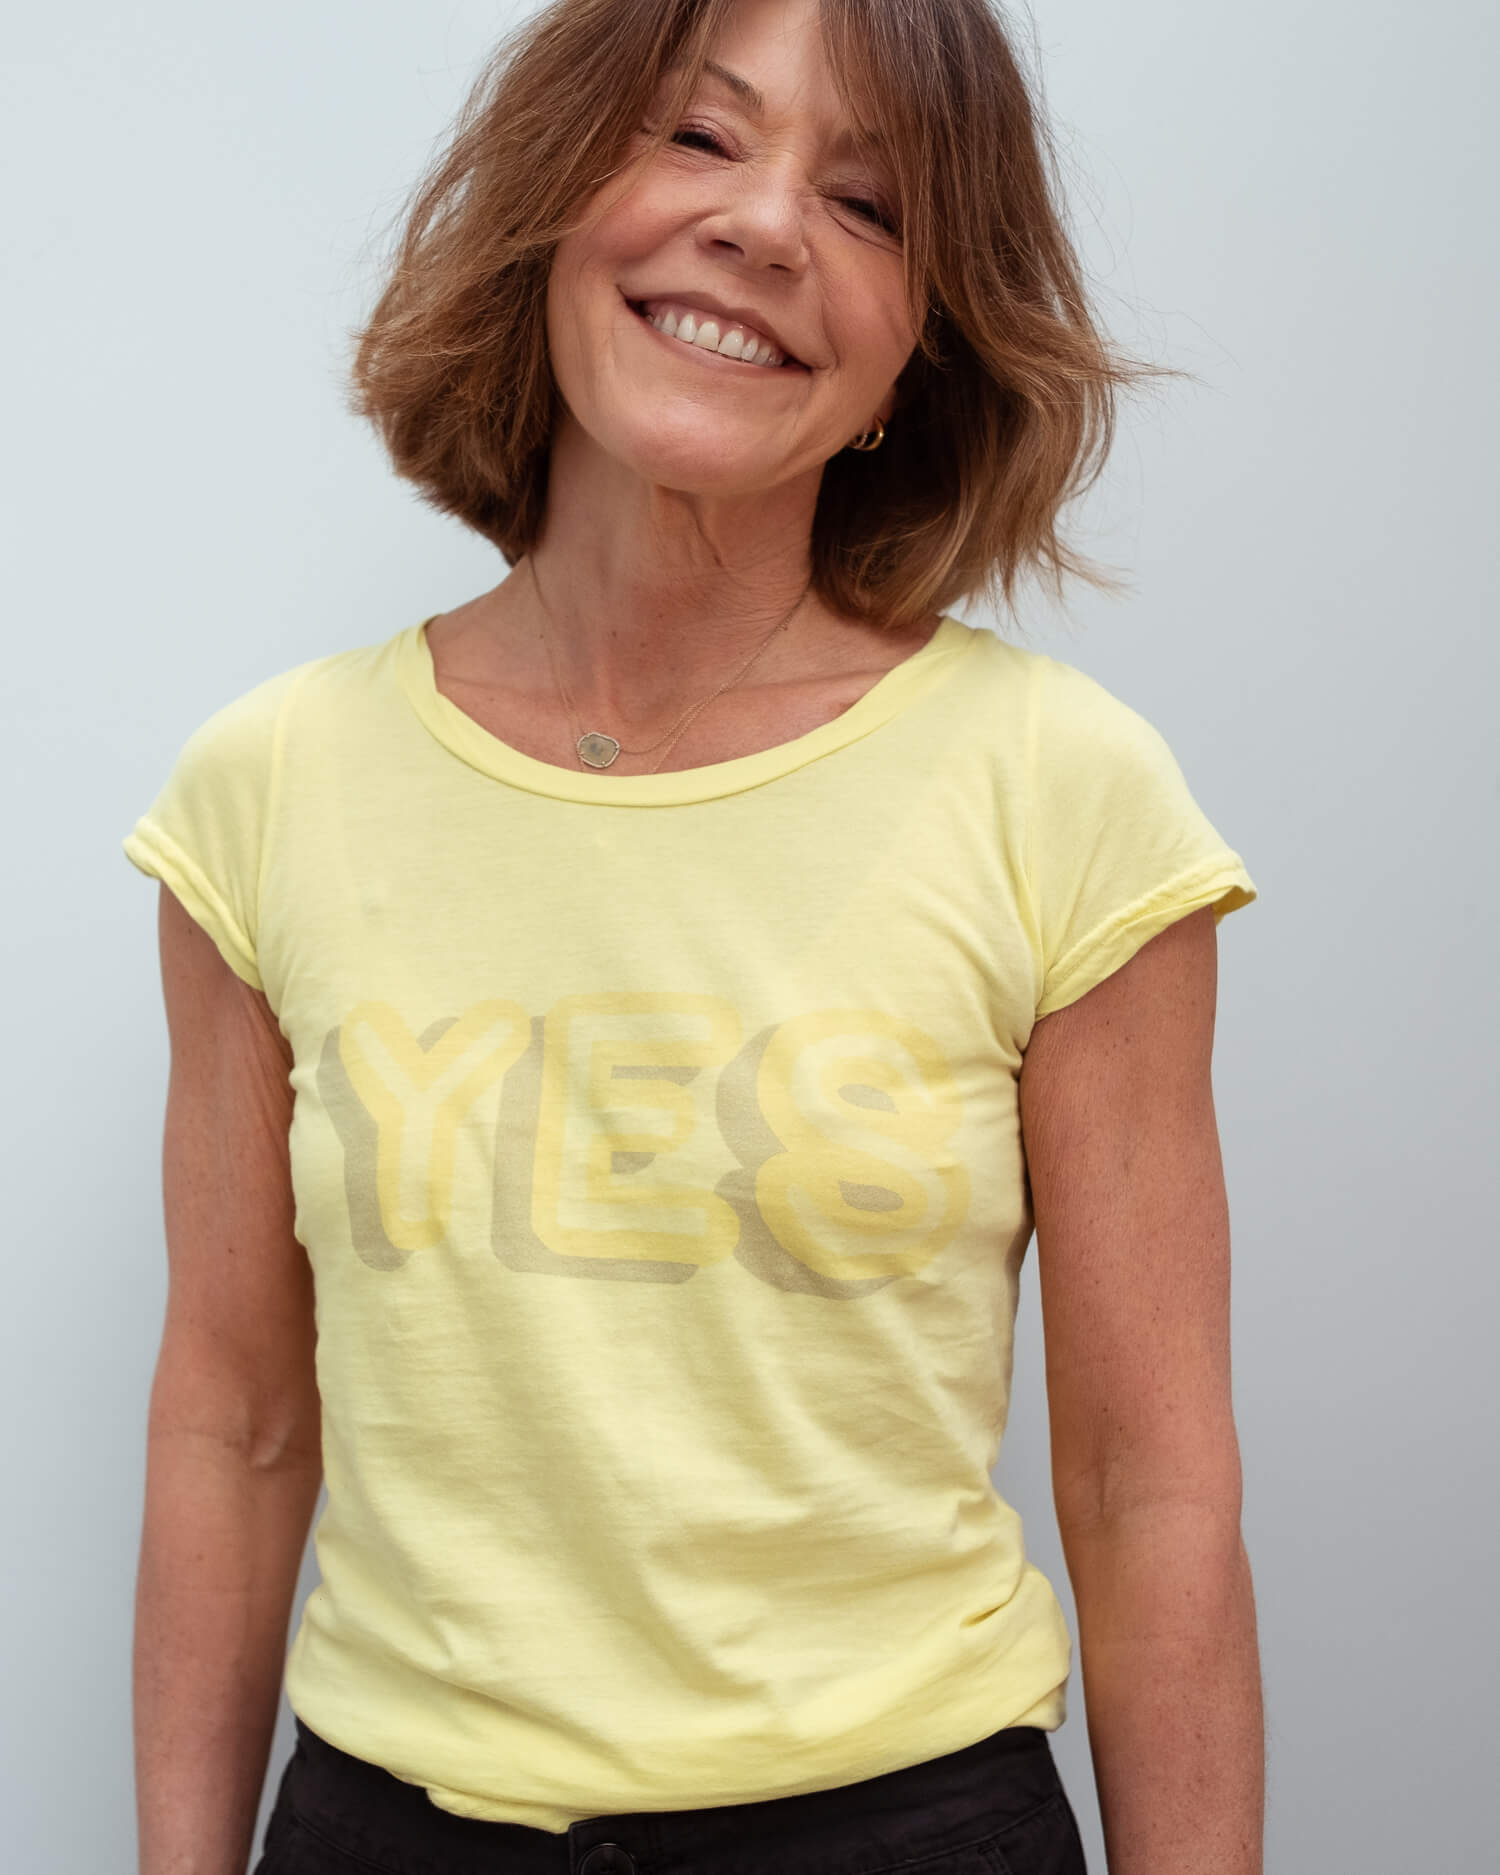 JU Yes/No tee in citrus